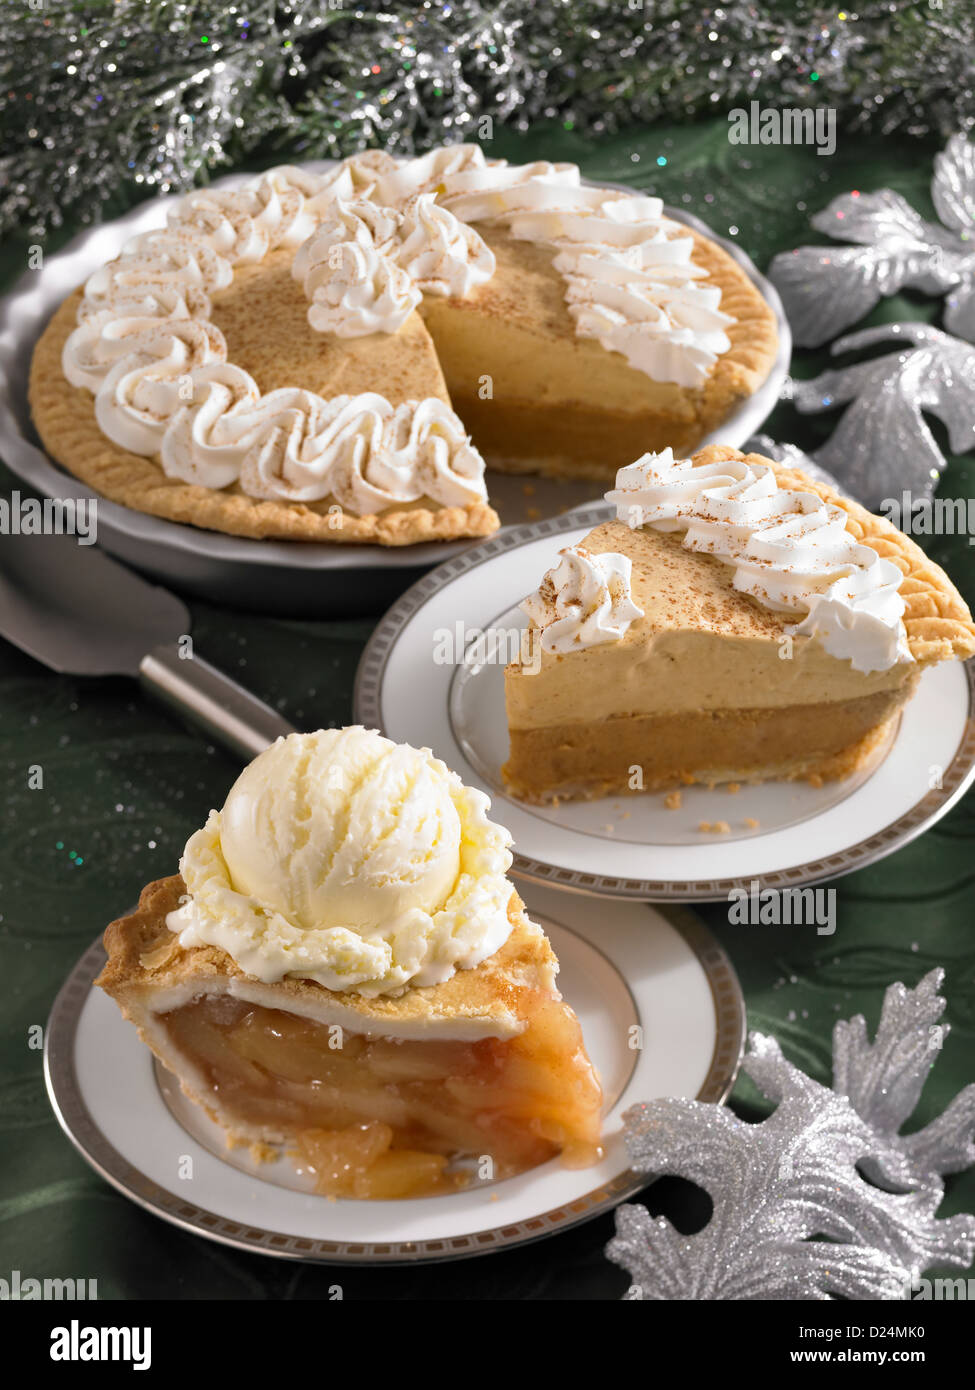 Pumpkin and apple pie slices with a whole pumpkin pie Stock Photo